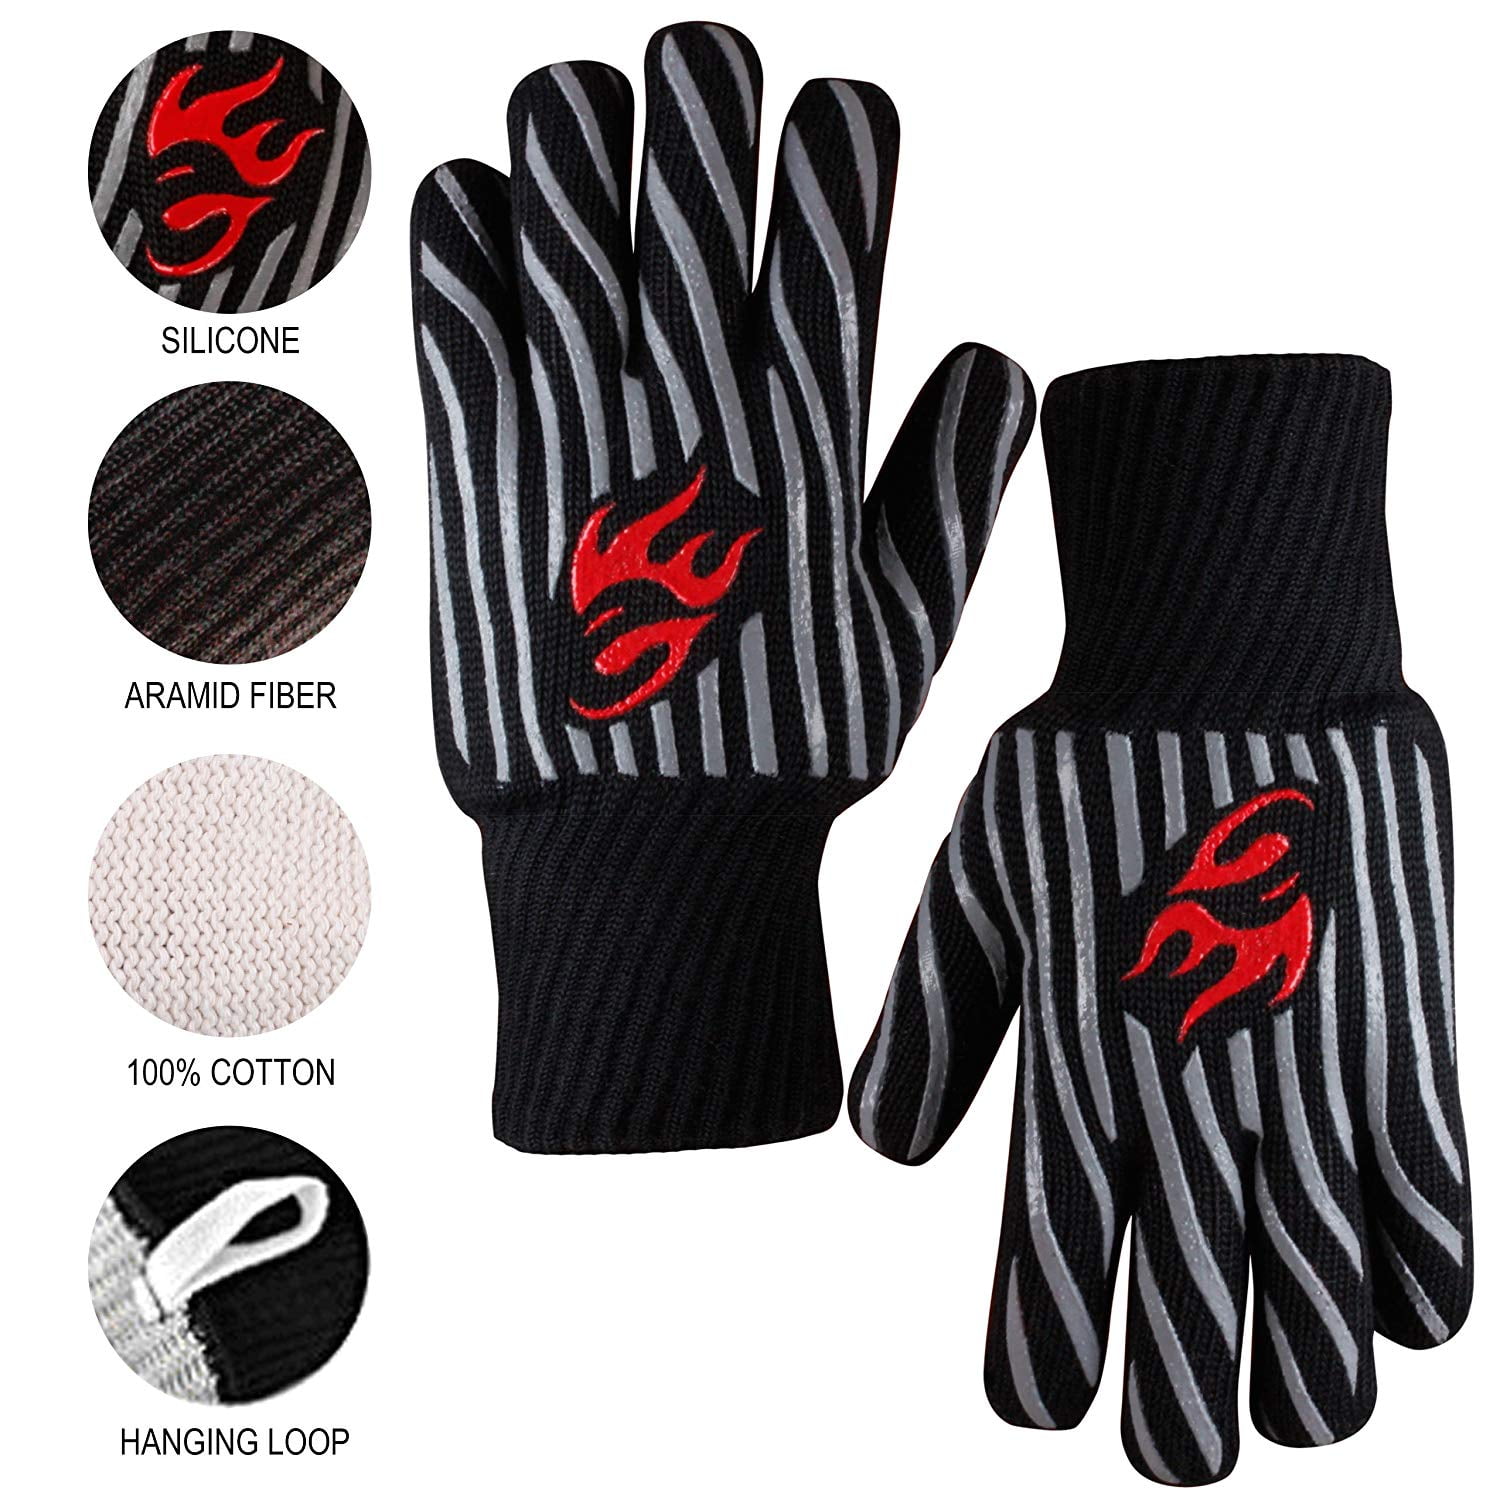 Kitchen Safe Cooking Gloves for Men Oven Gloves 932°F Heat Resistant Gloves Oven Gloves Non-Slip Silicone BBQ Gloves Oven Mitts,Smoker,Barbecue,Grilling Cut-Resistant Grill Gloves